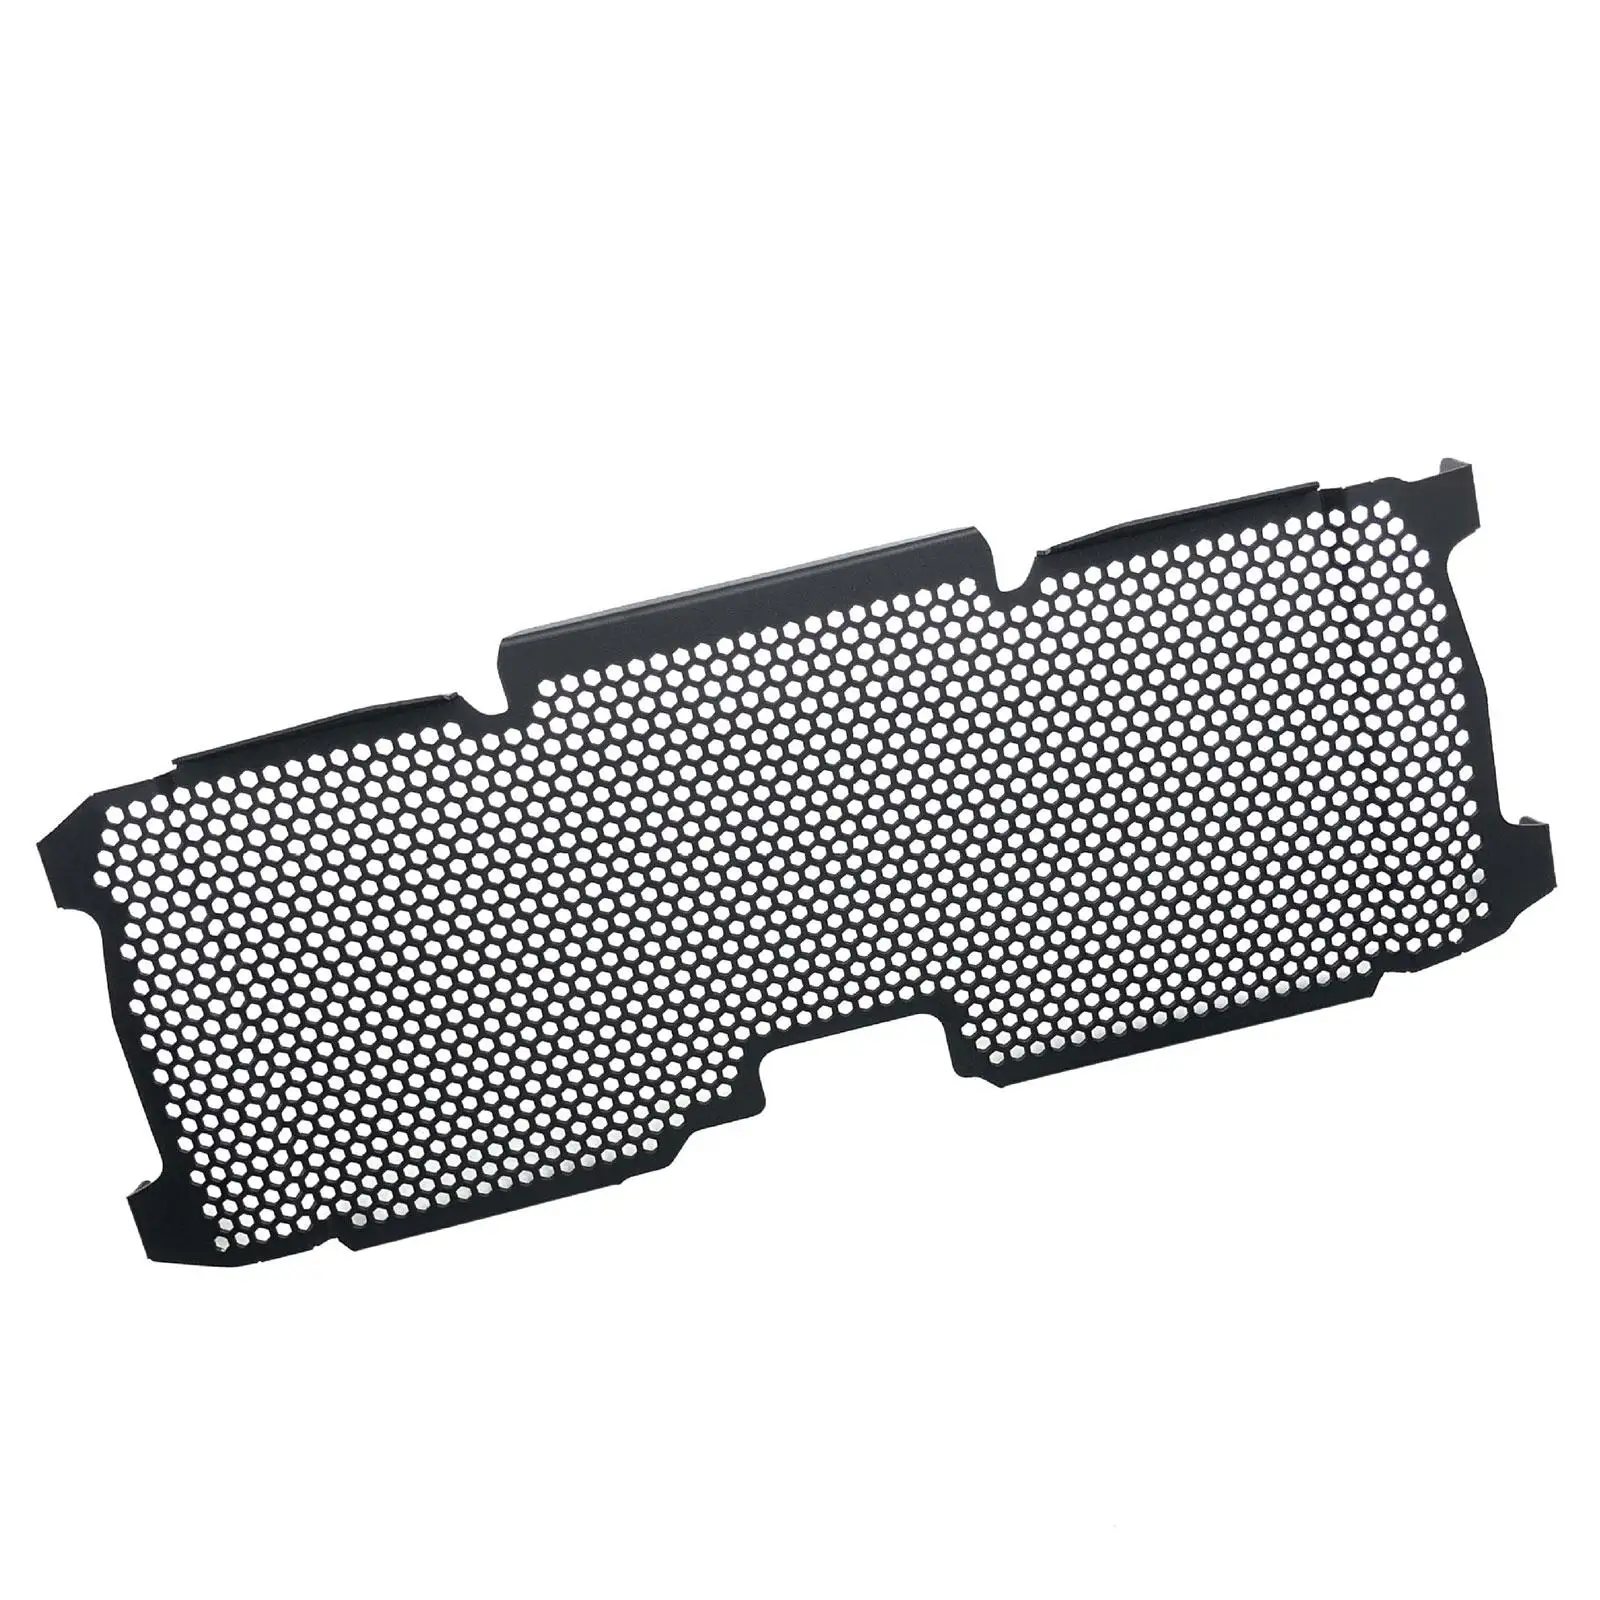 Radiator Guard Grille Protector Easy to Install for BMW R1200RS 2015-2018